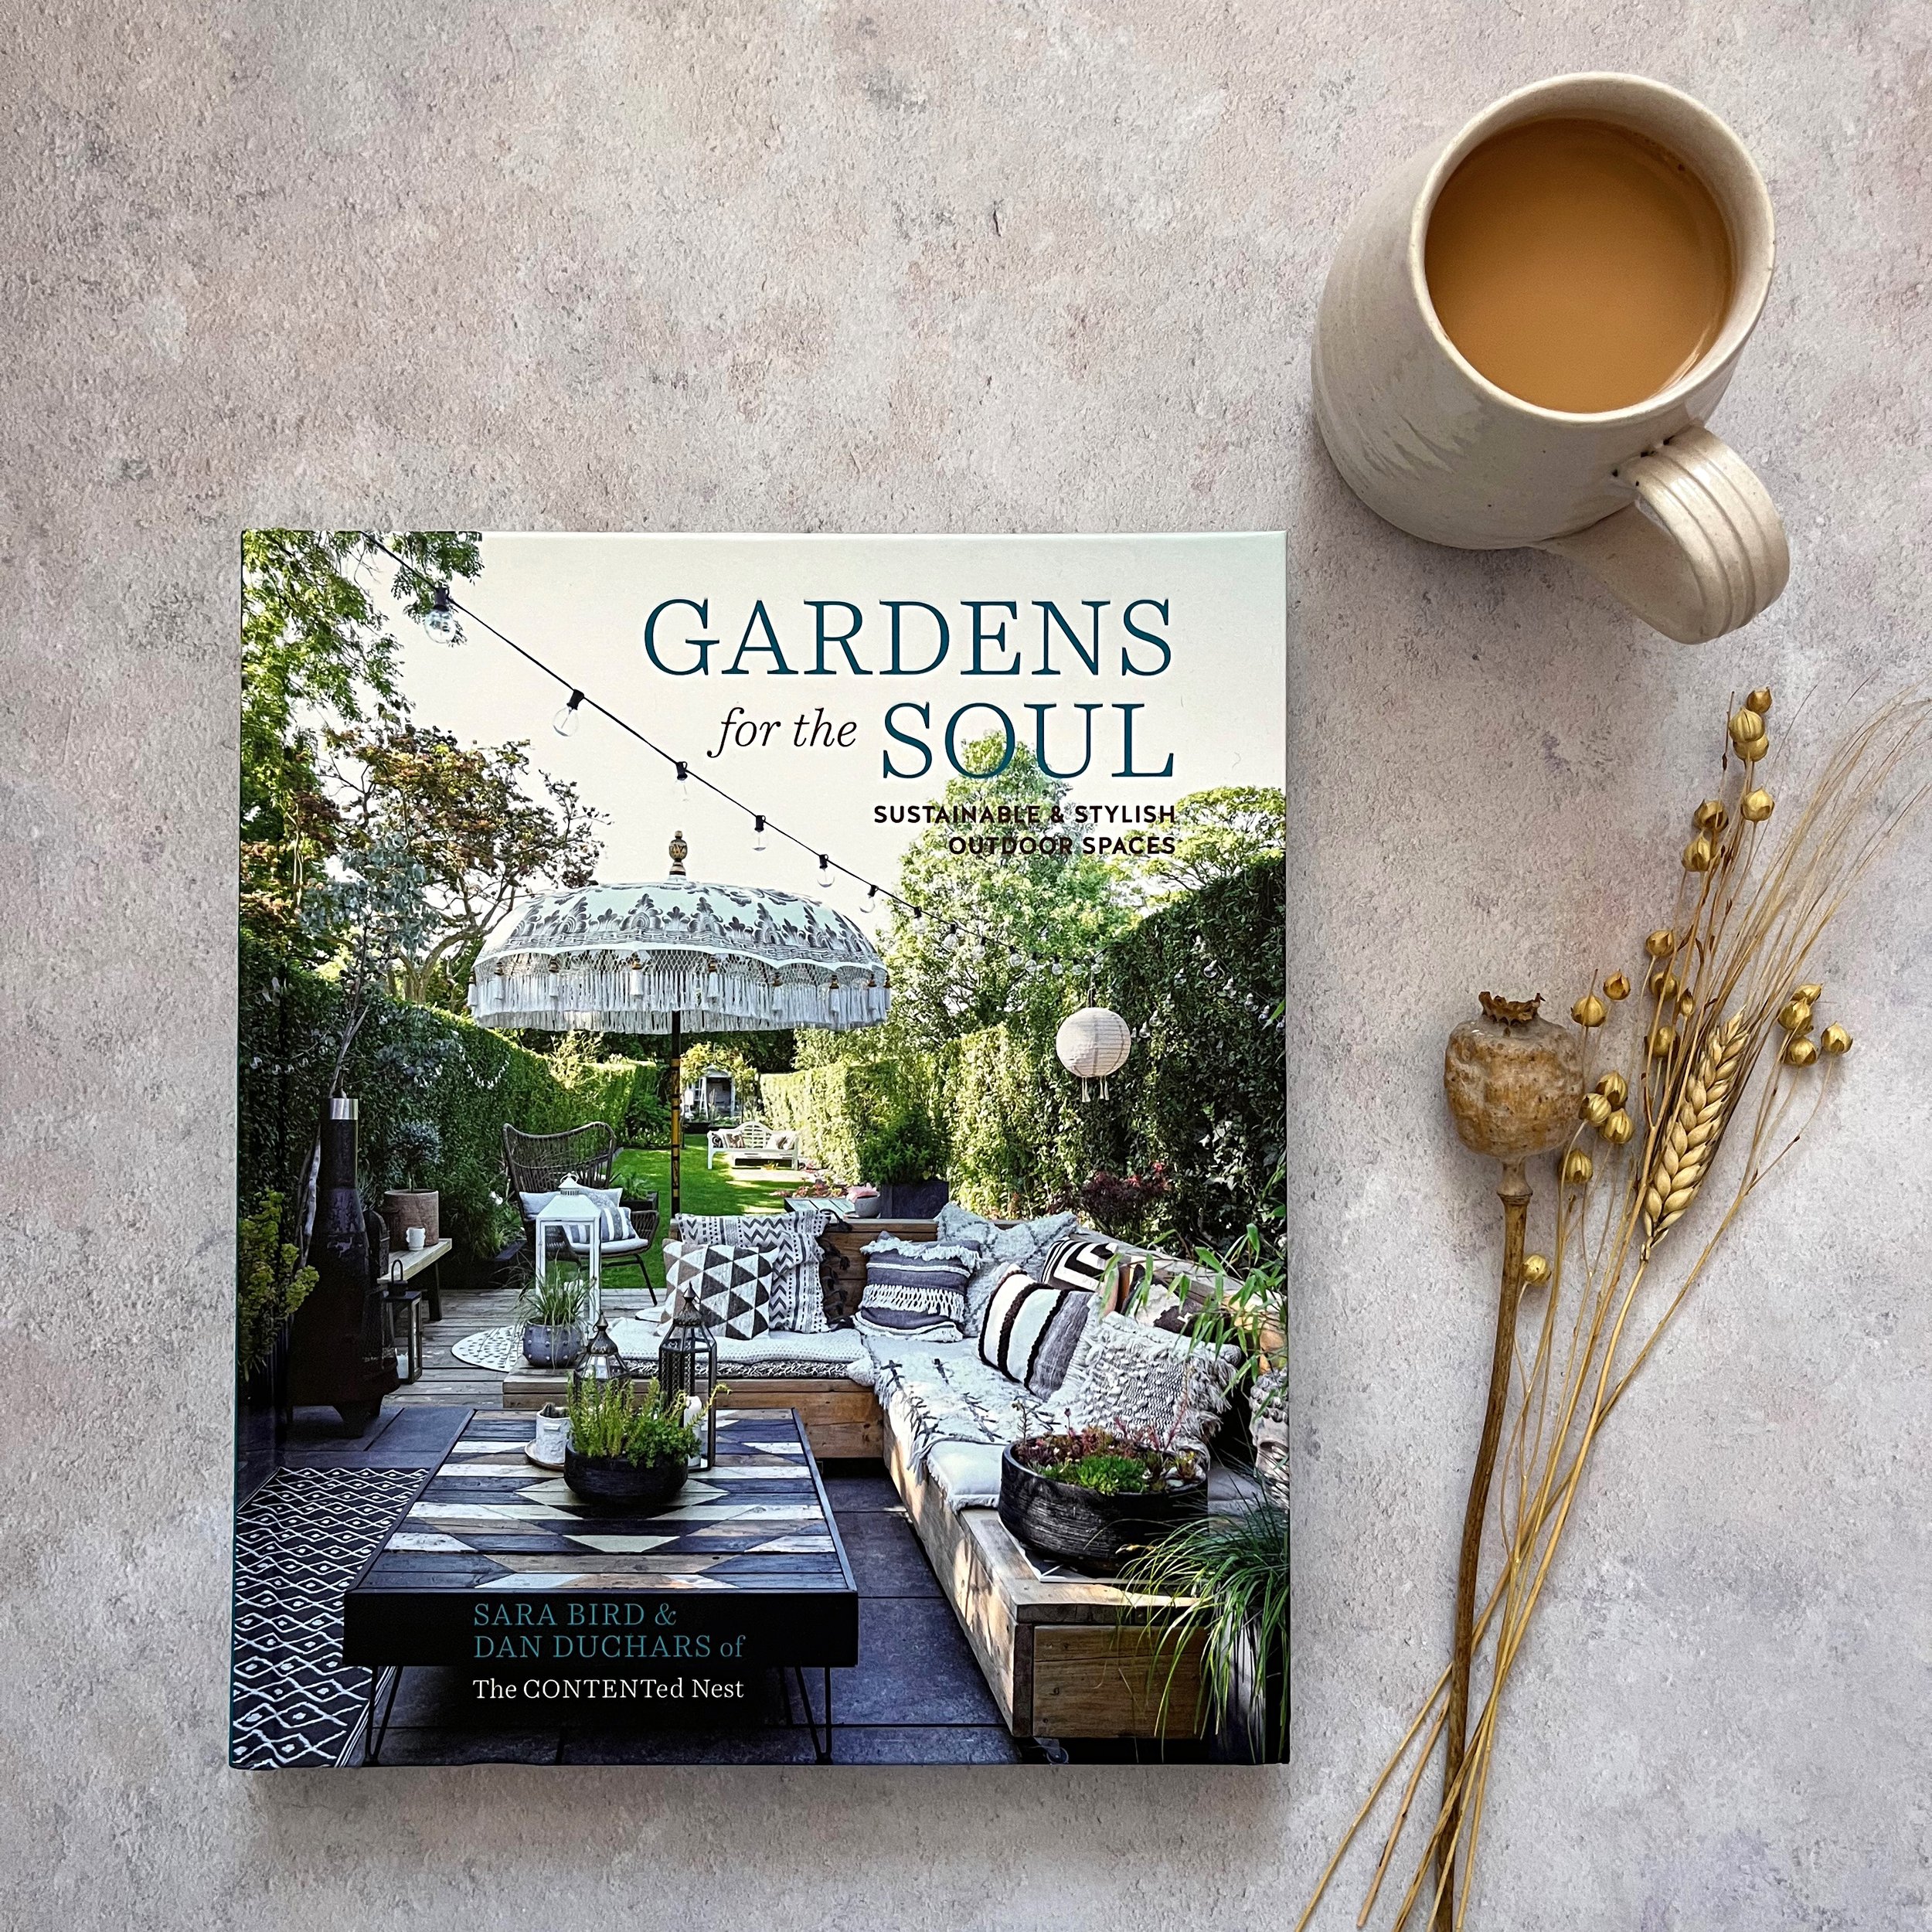 Gardens for the Soul book